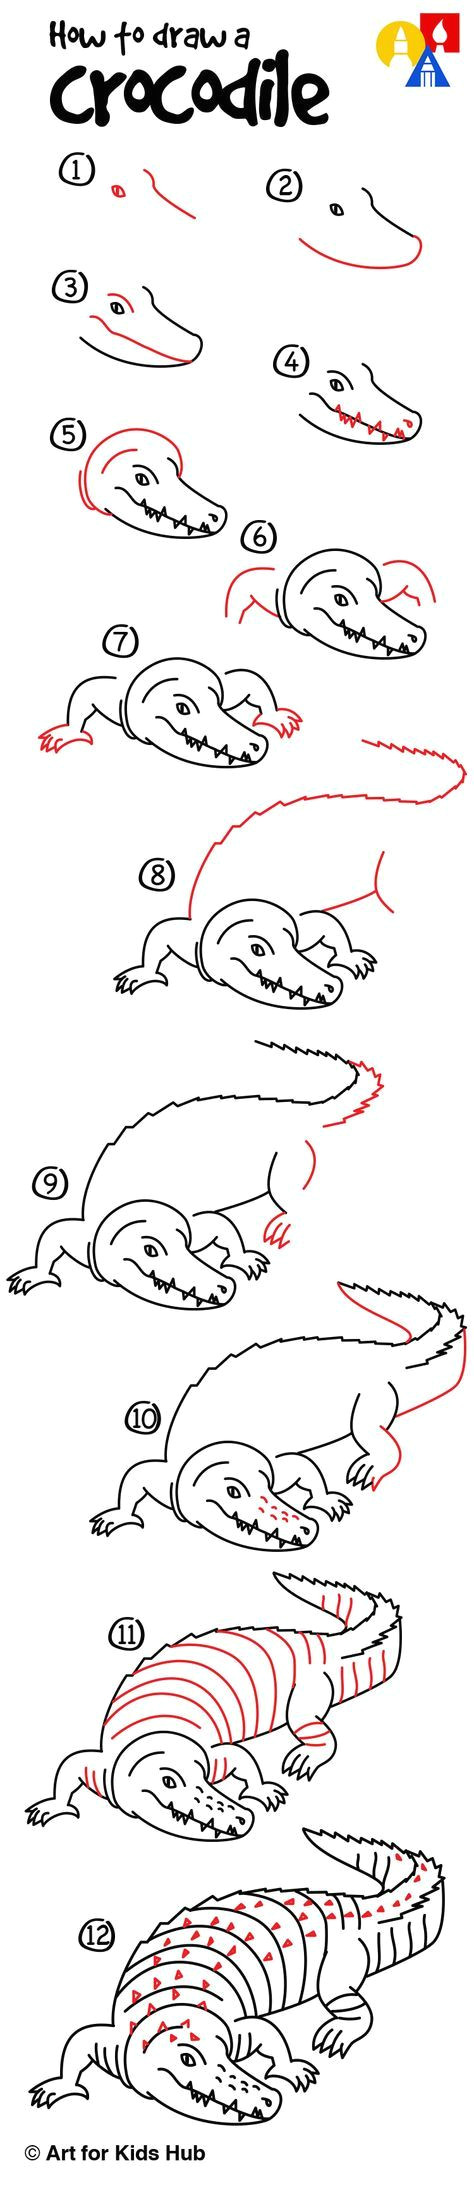 how to draw a realistic crocodile for kids